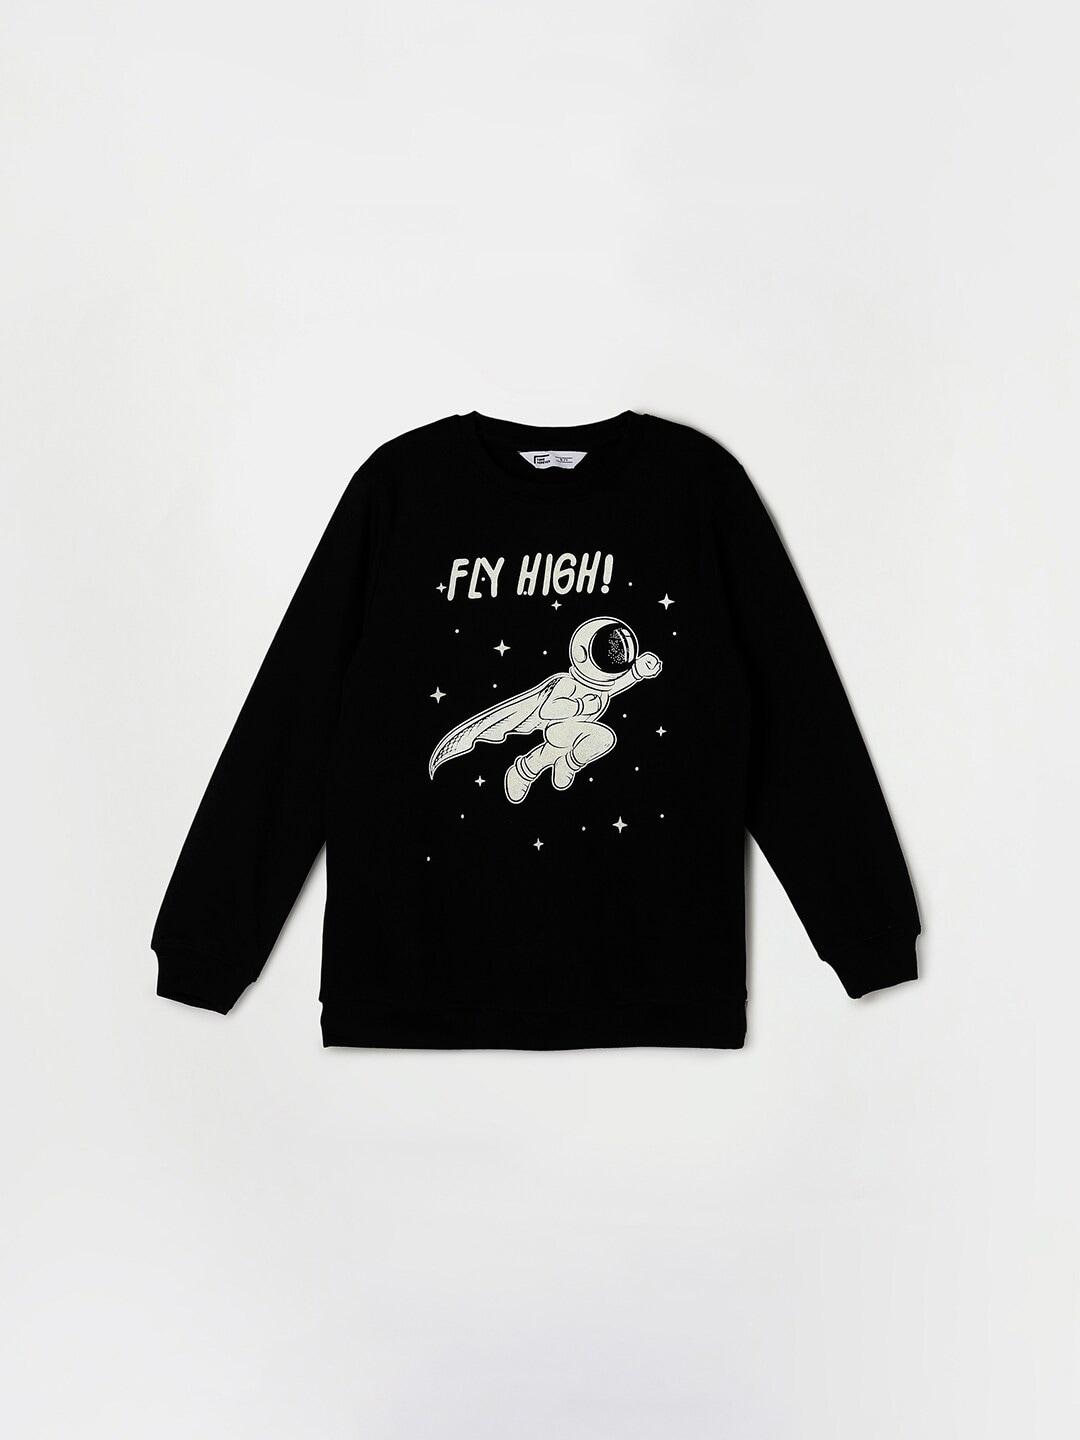 fame-forever-by-lifestyle-boys-graphic-printed-long-sleeves-cotton-pullover-sweatshirt